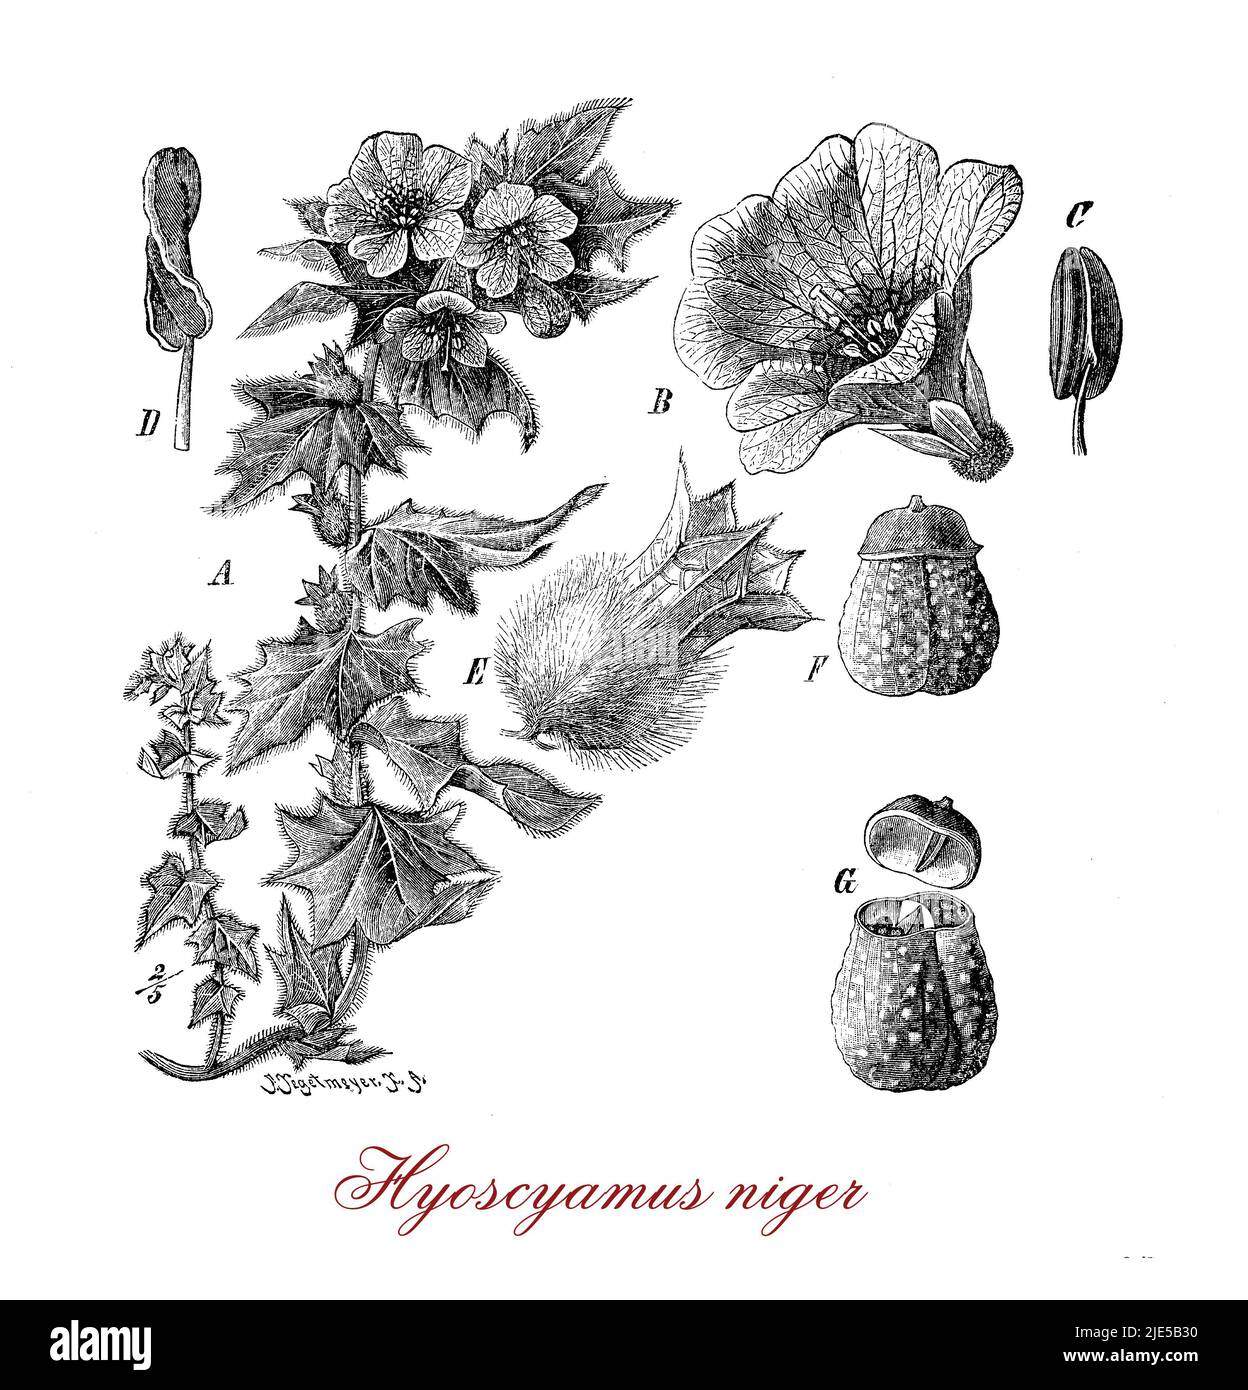 Vintage illustration of Hyoscyamus niger or henbane,poisonous plant used in antique medicine as anaesthetic potion and for beer flavouring, now cultivated for pharmaceutical purposes Stock Photo